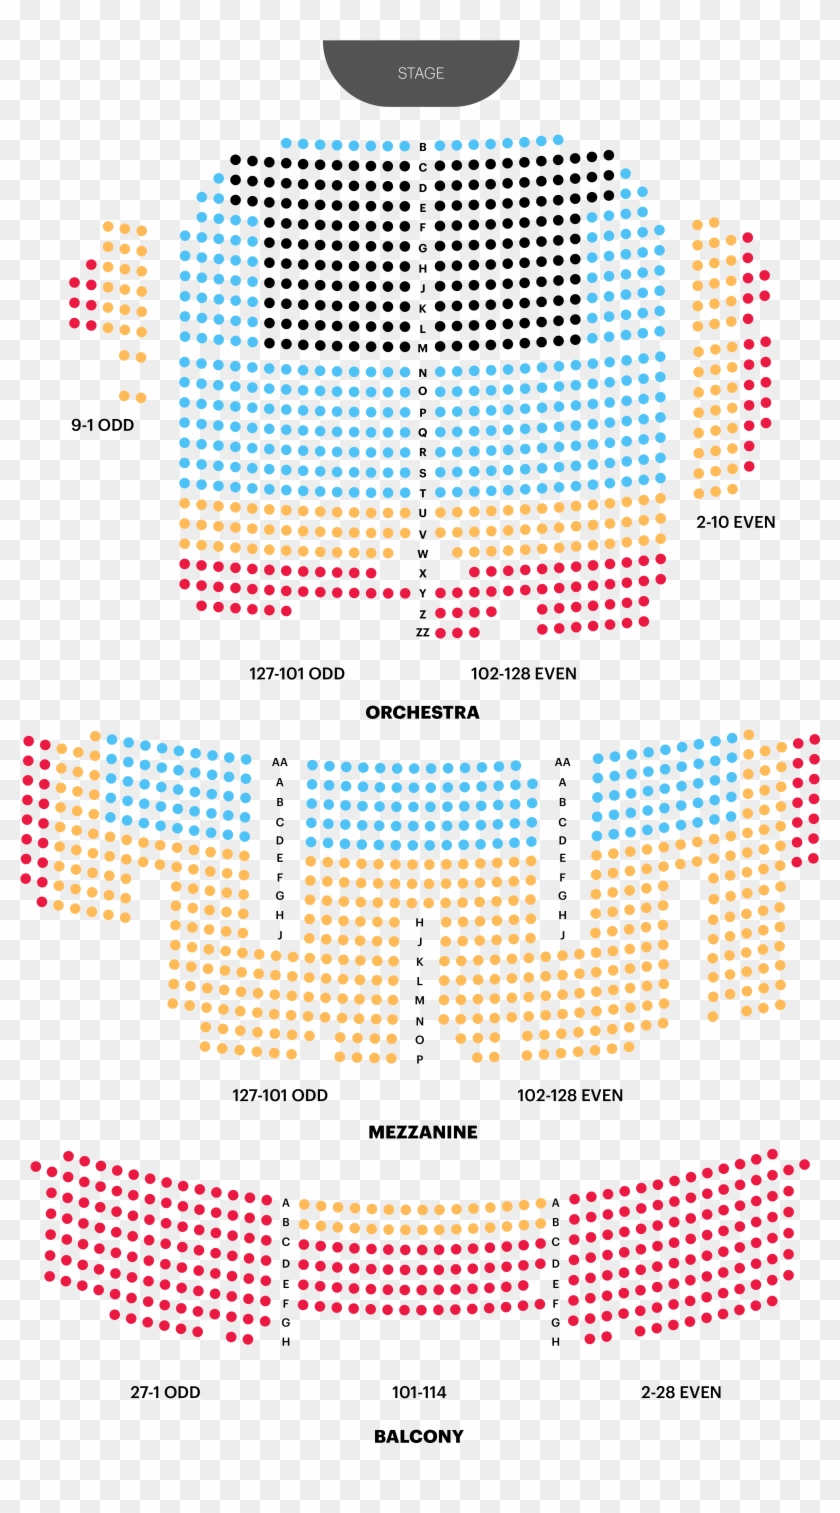 Palace Theatre Seating Chart Best Seats Pro Tipore Central Ferry Piers Hong Kong Hd Png 3312x5787 4242232 Pngfind